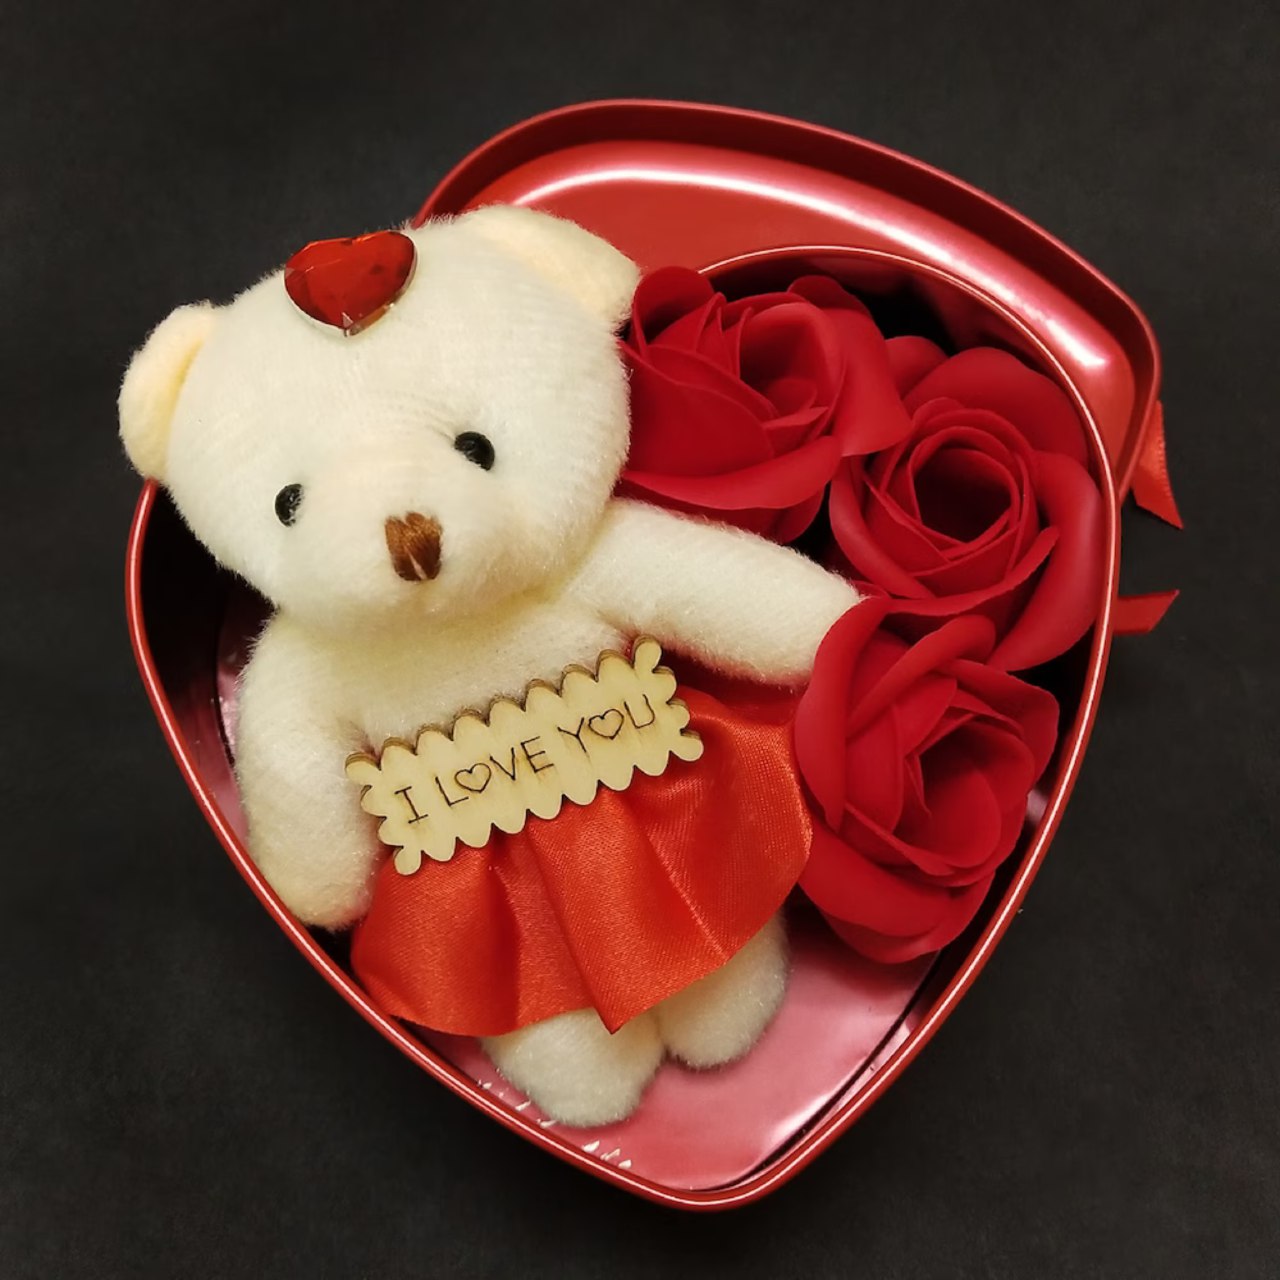 Buy OS Retail Branded Very Soft Lovable/Huggable Teddy Bear for Girlfriend/Birthday  Gift/Boy/Girl (White, 2.5 Feet) Online at Low Prices in India - Amazon.in